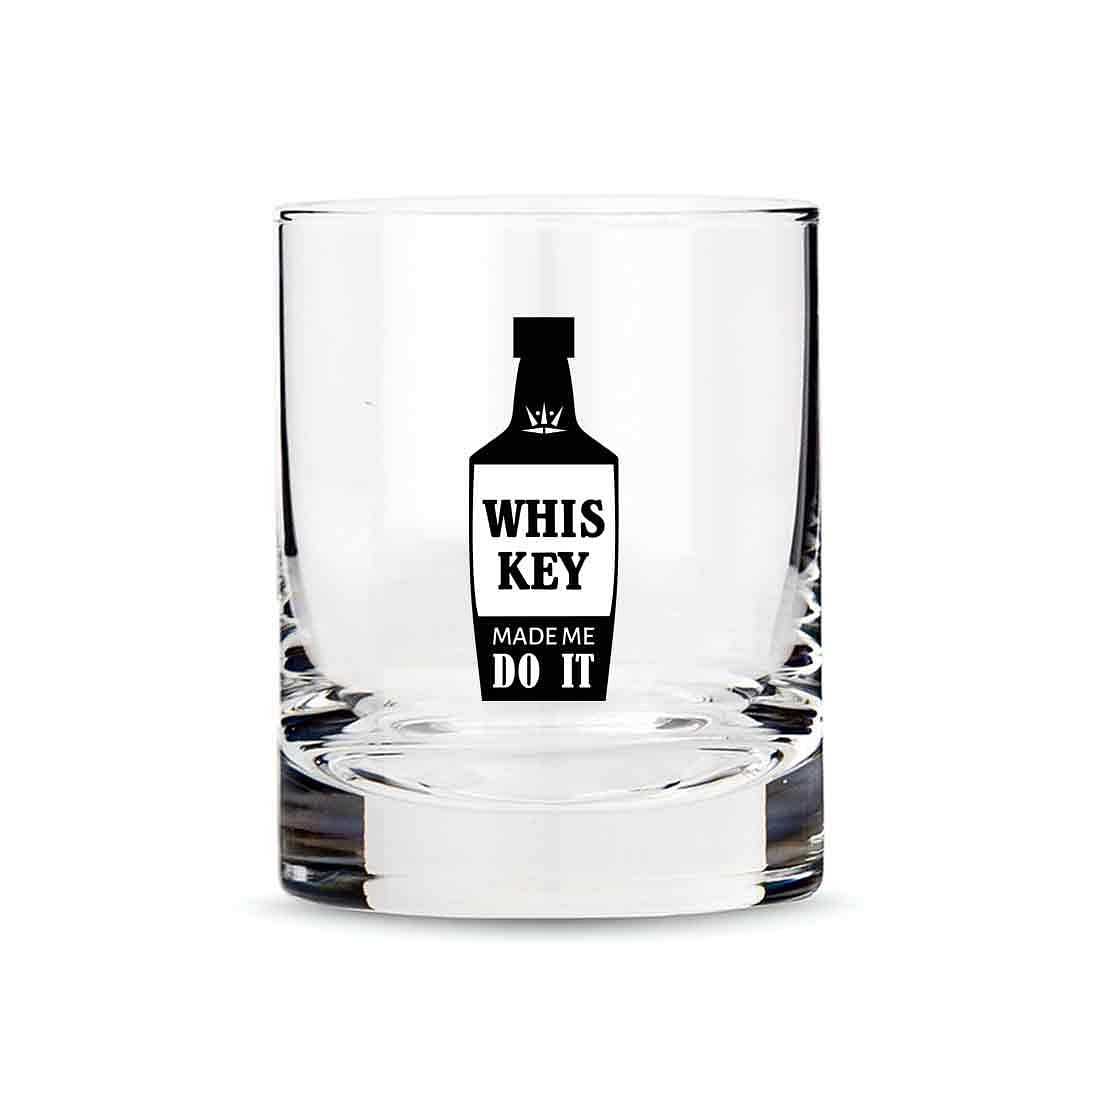 Whiskey Glasses Liquor Glass-  Anniversary Birthday Gift Funny Gifts for Husband Bf - WHISKY MADE ME DO IT Nutcase